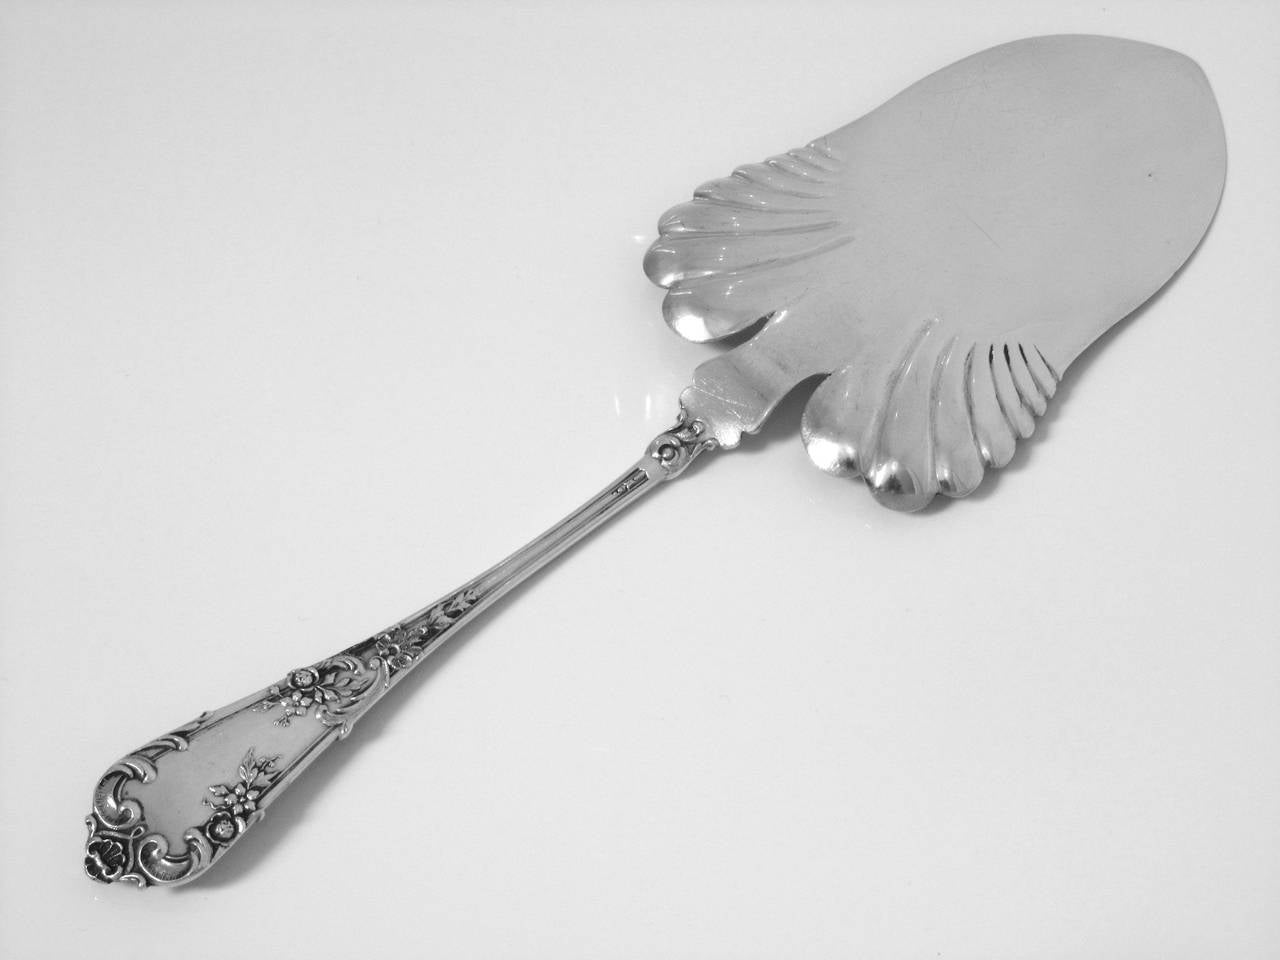 Gorgeous French All Sterling Silver Pie Pastry Fish Server Fish-Shaped blade In Excellent Condition For Sale In Triaize, Pays de Loire